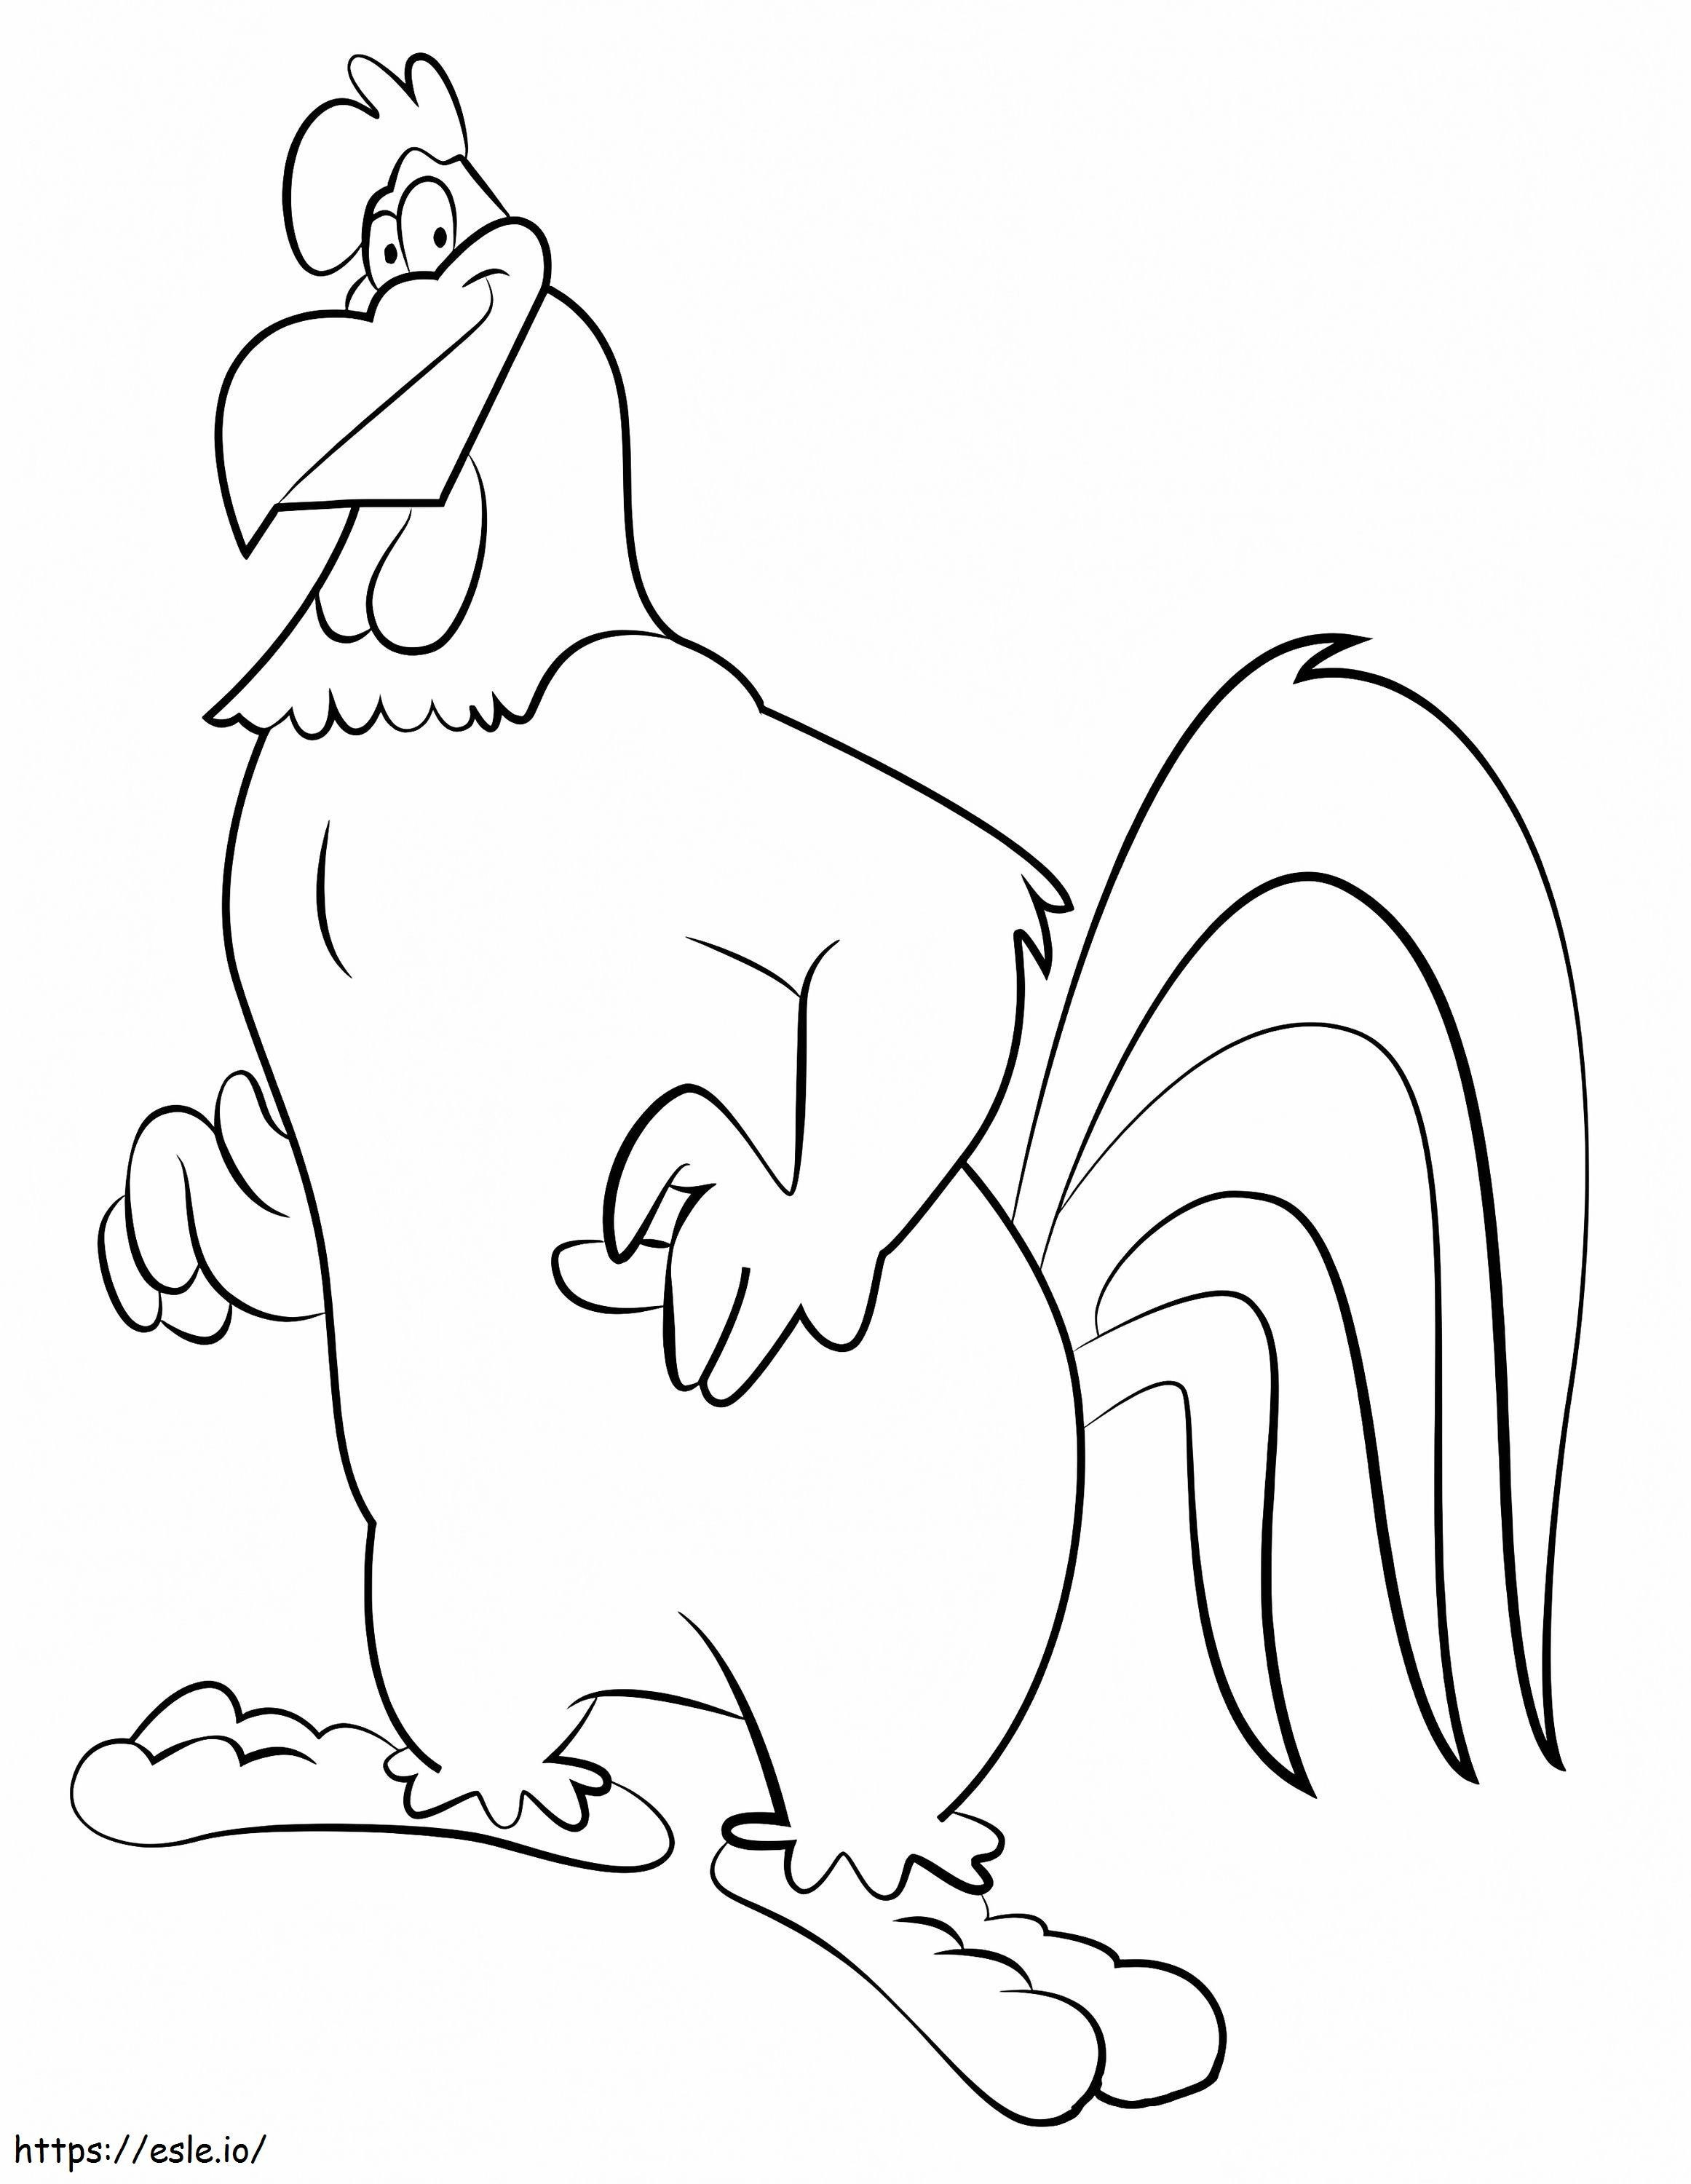 Foghorn Leghorn From Looney Tunes coloring page